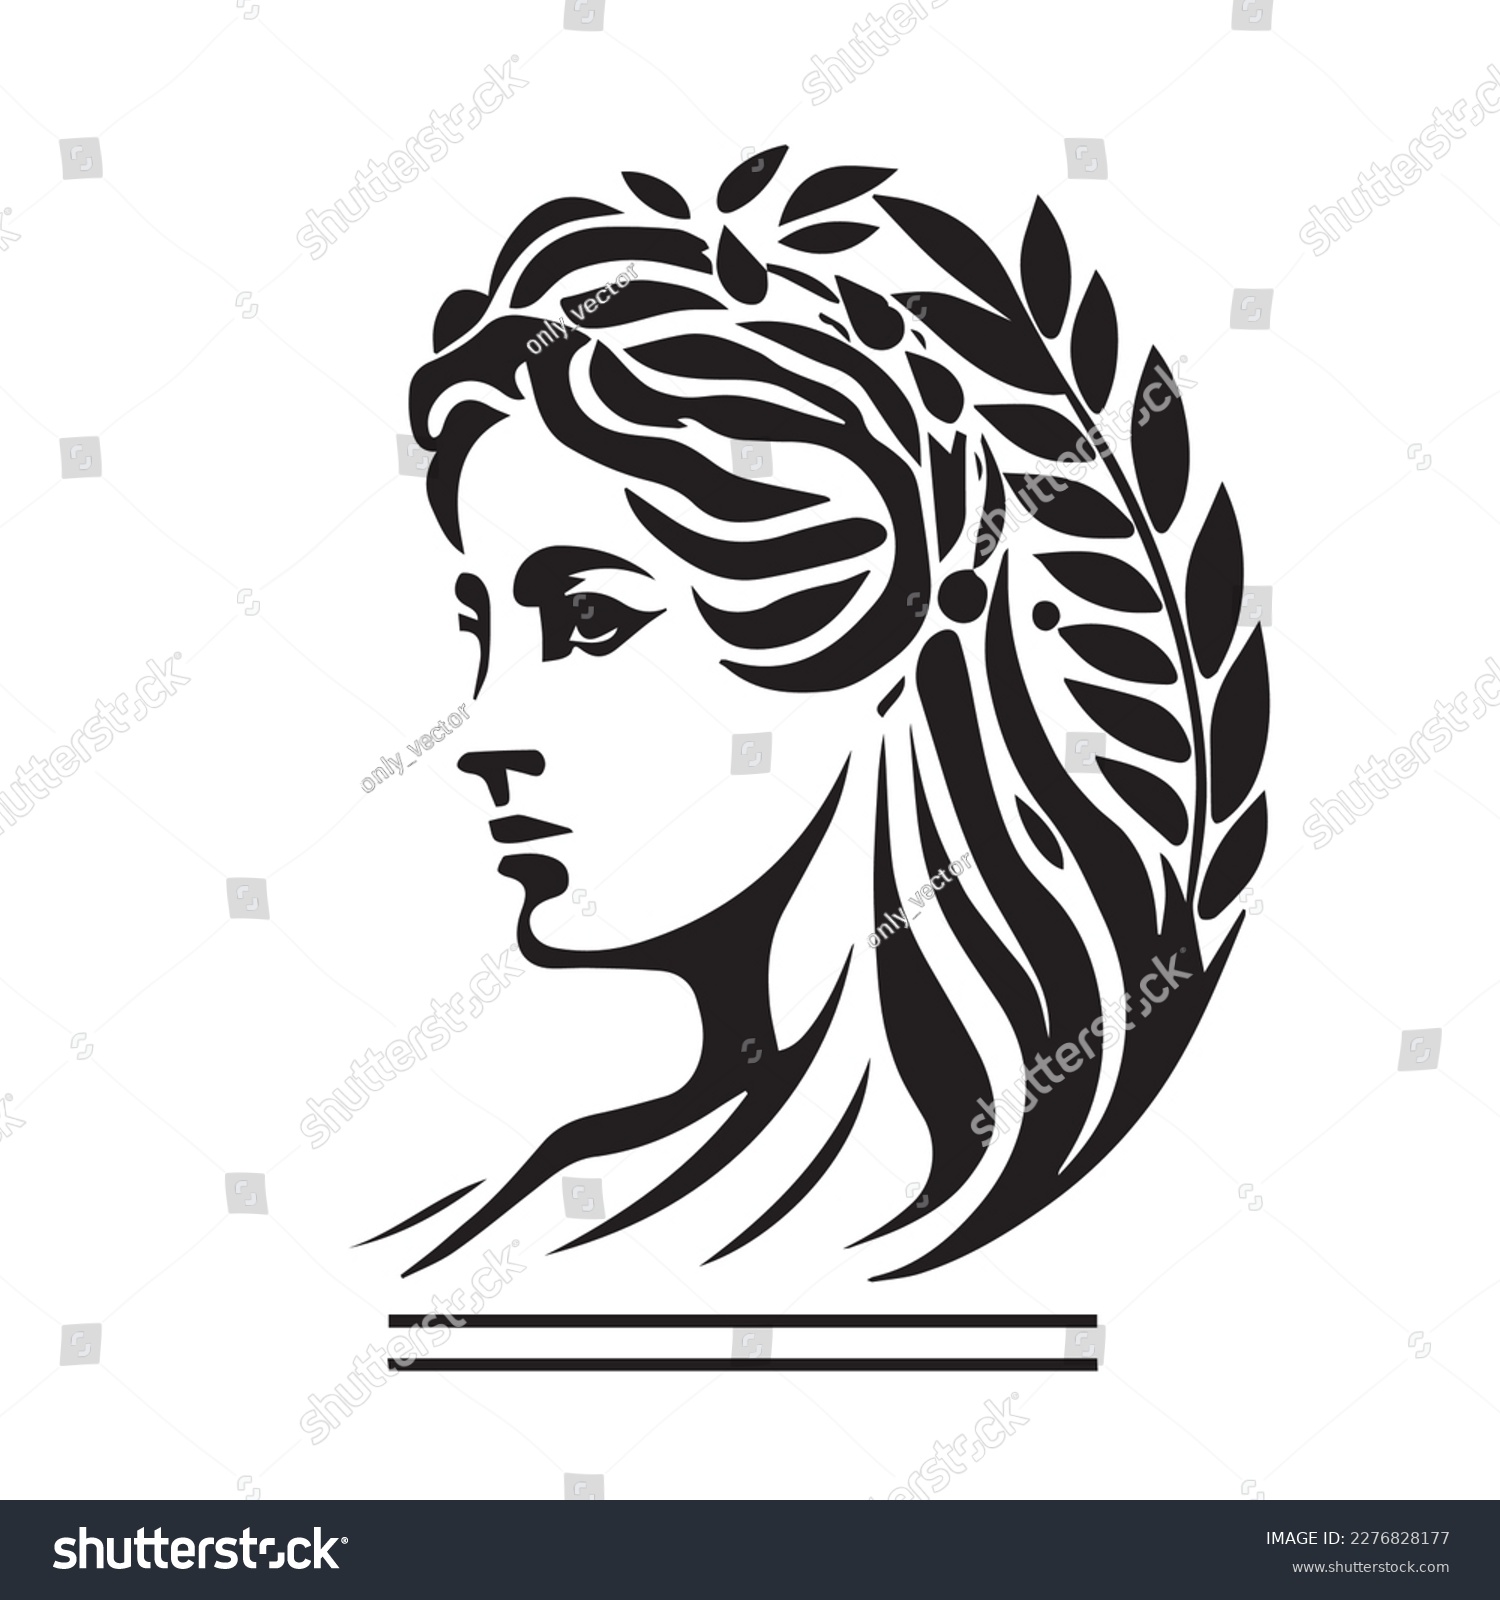 SVG of Ancient Greek woman head logo. Vector illustration of female face. Silhouette svg, only black and white. svg